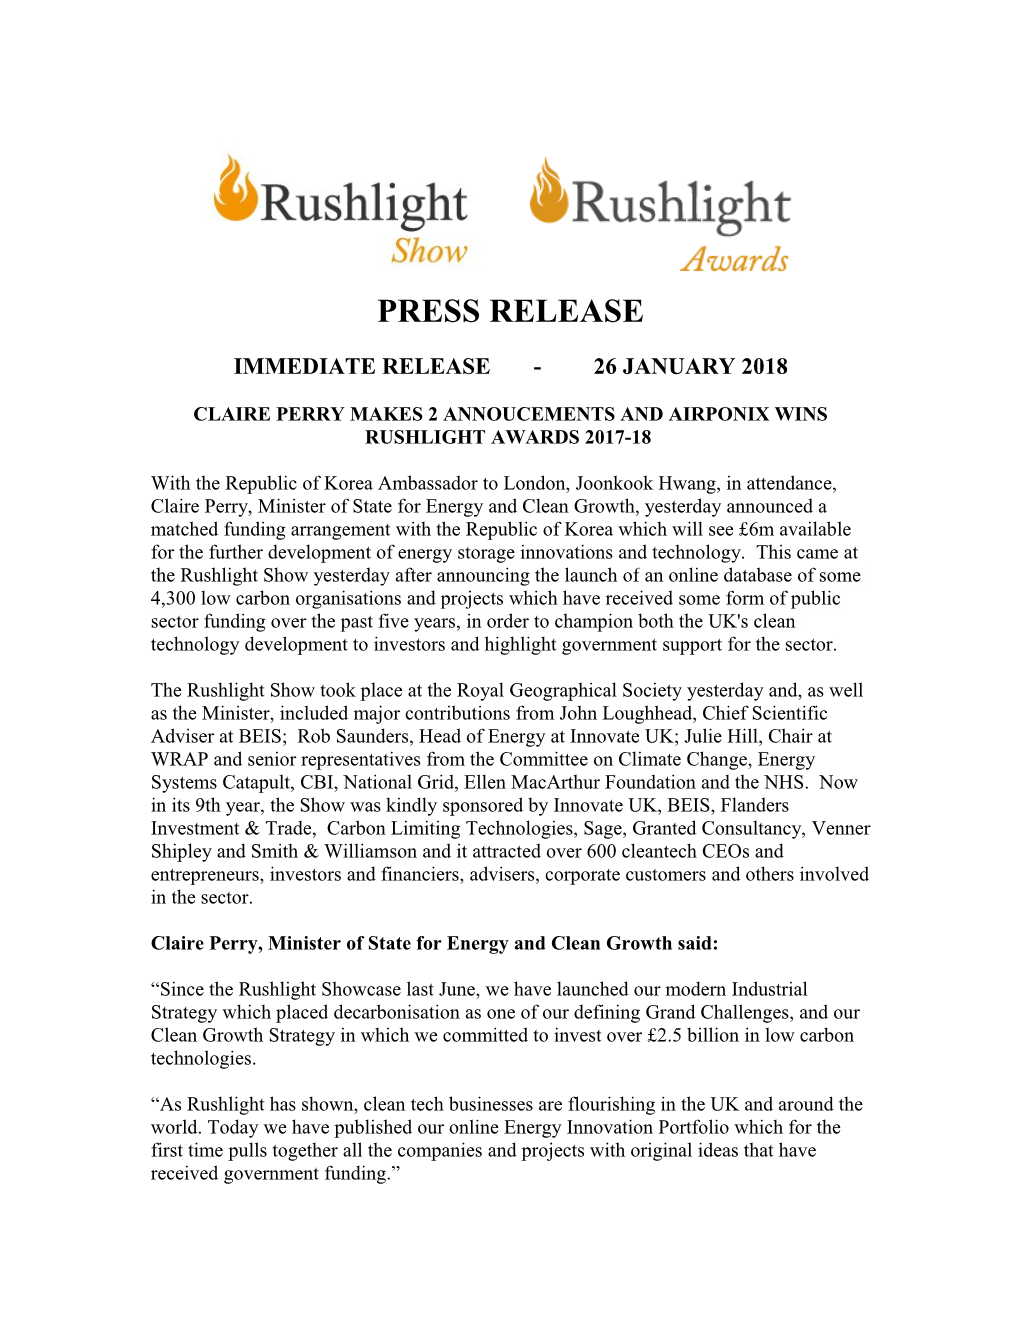 Claire Perry Makes 2 Annoucements and Airponix Wins Rushlight Awards 2017-18